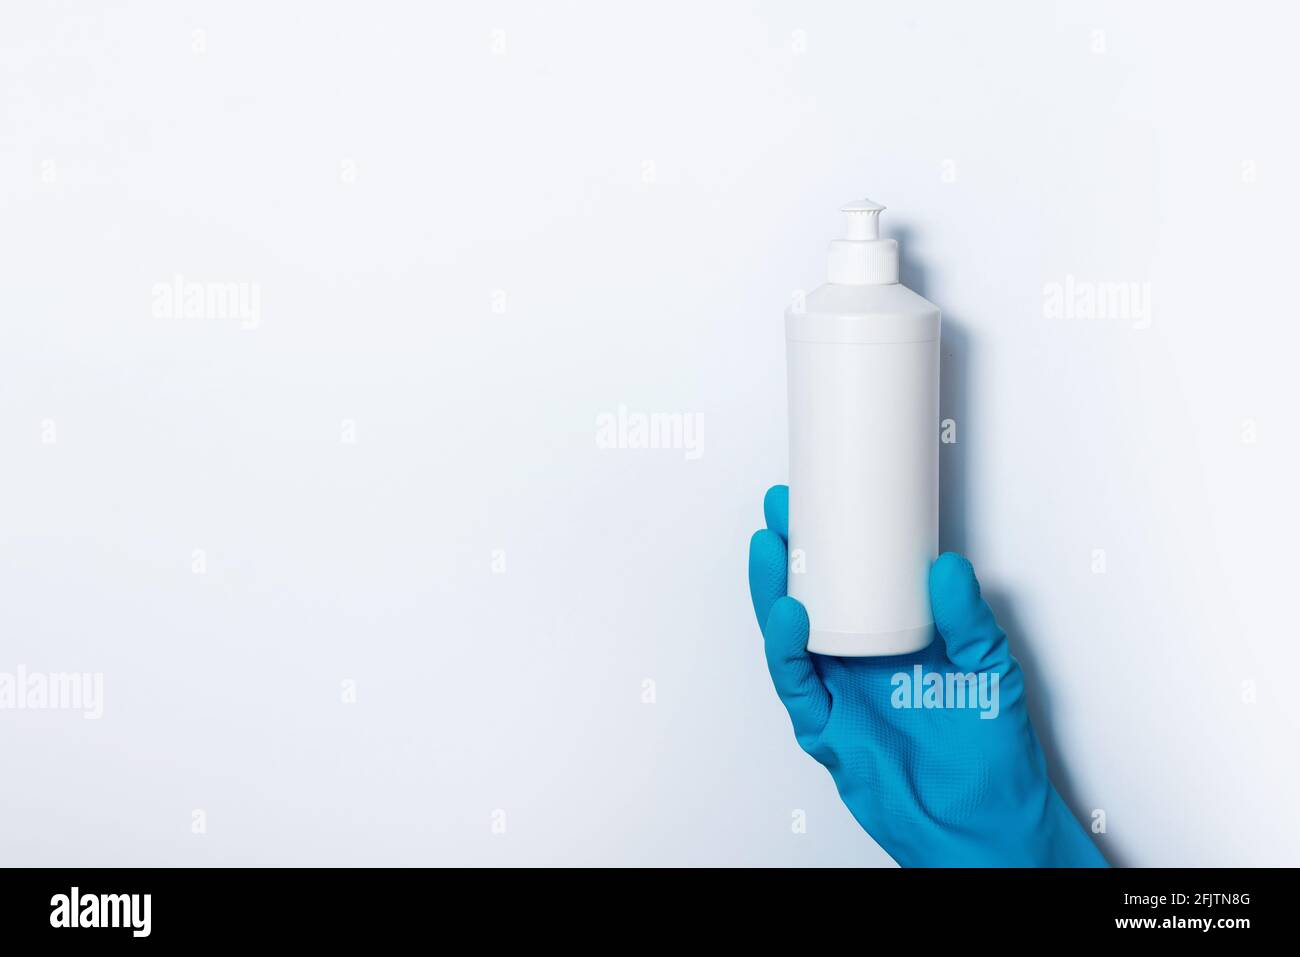 Hand in glove holding white plastic bottle of cleaning product, household chemicals. Copy space. Cleaning service concept. Household chemical cleaning Stock Photo